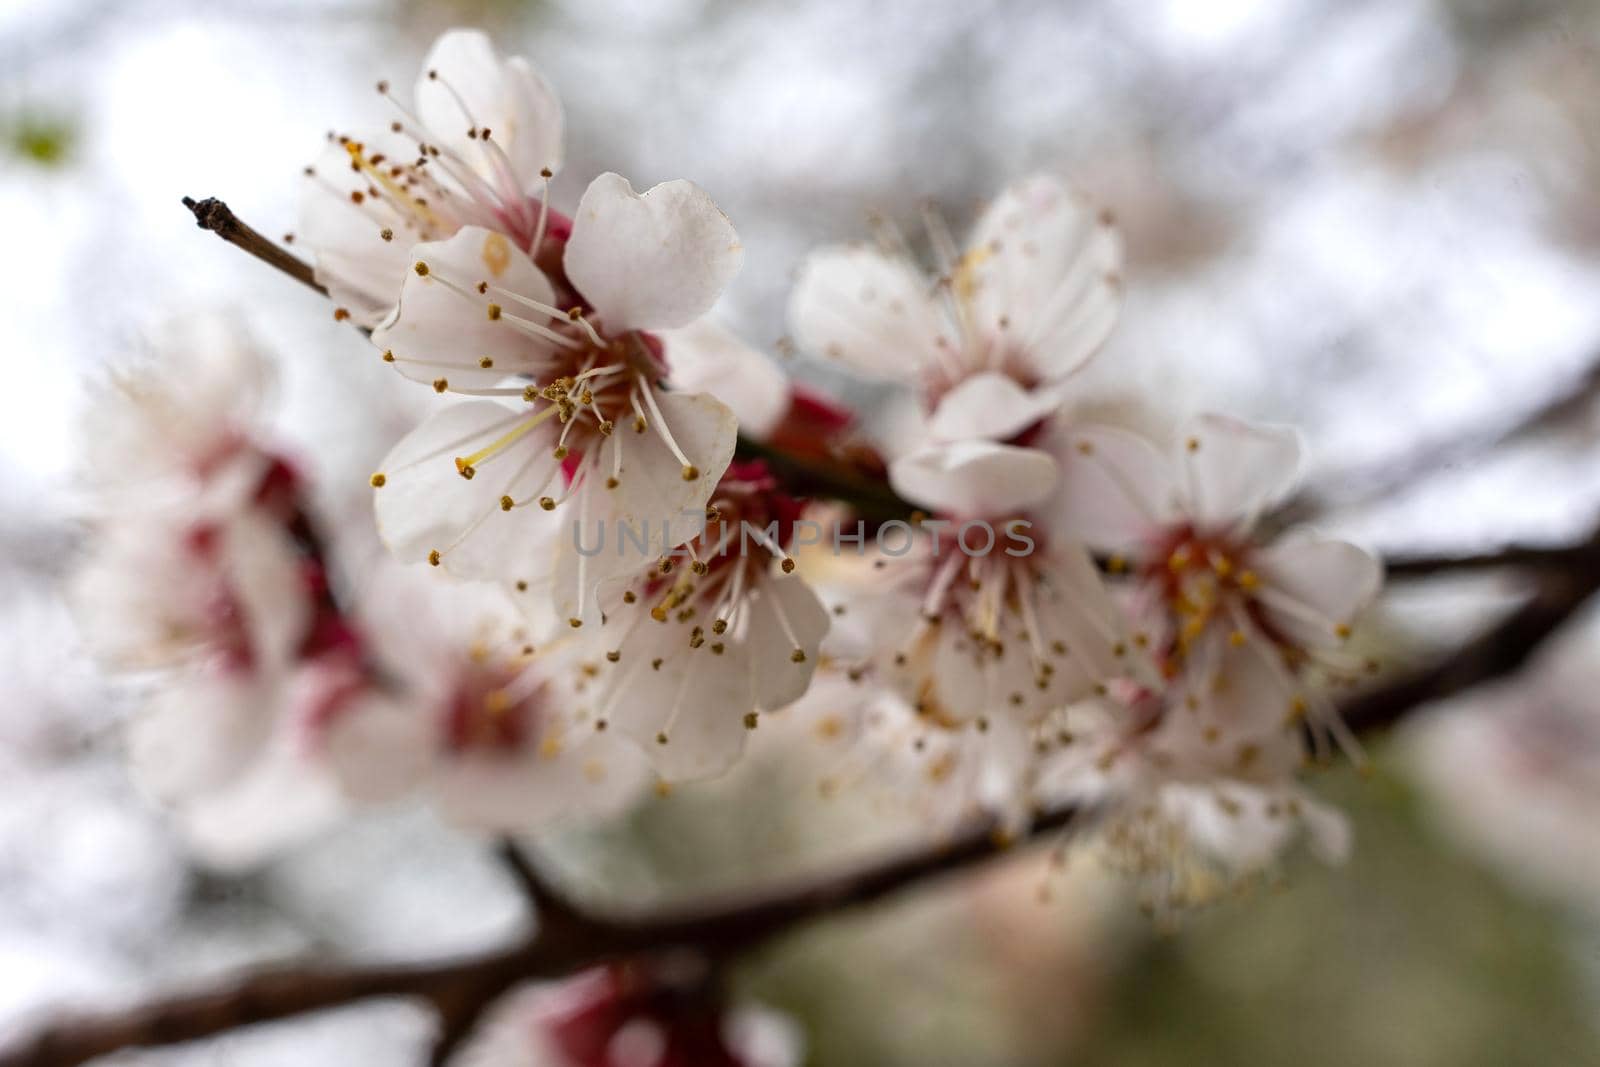 Abundant cherry blossoms with white flowers. Closeup photo with blurred background.